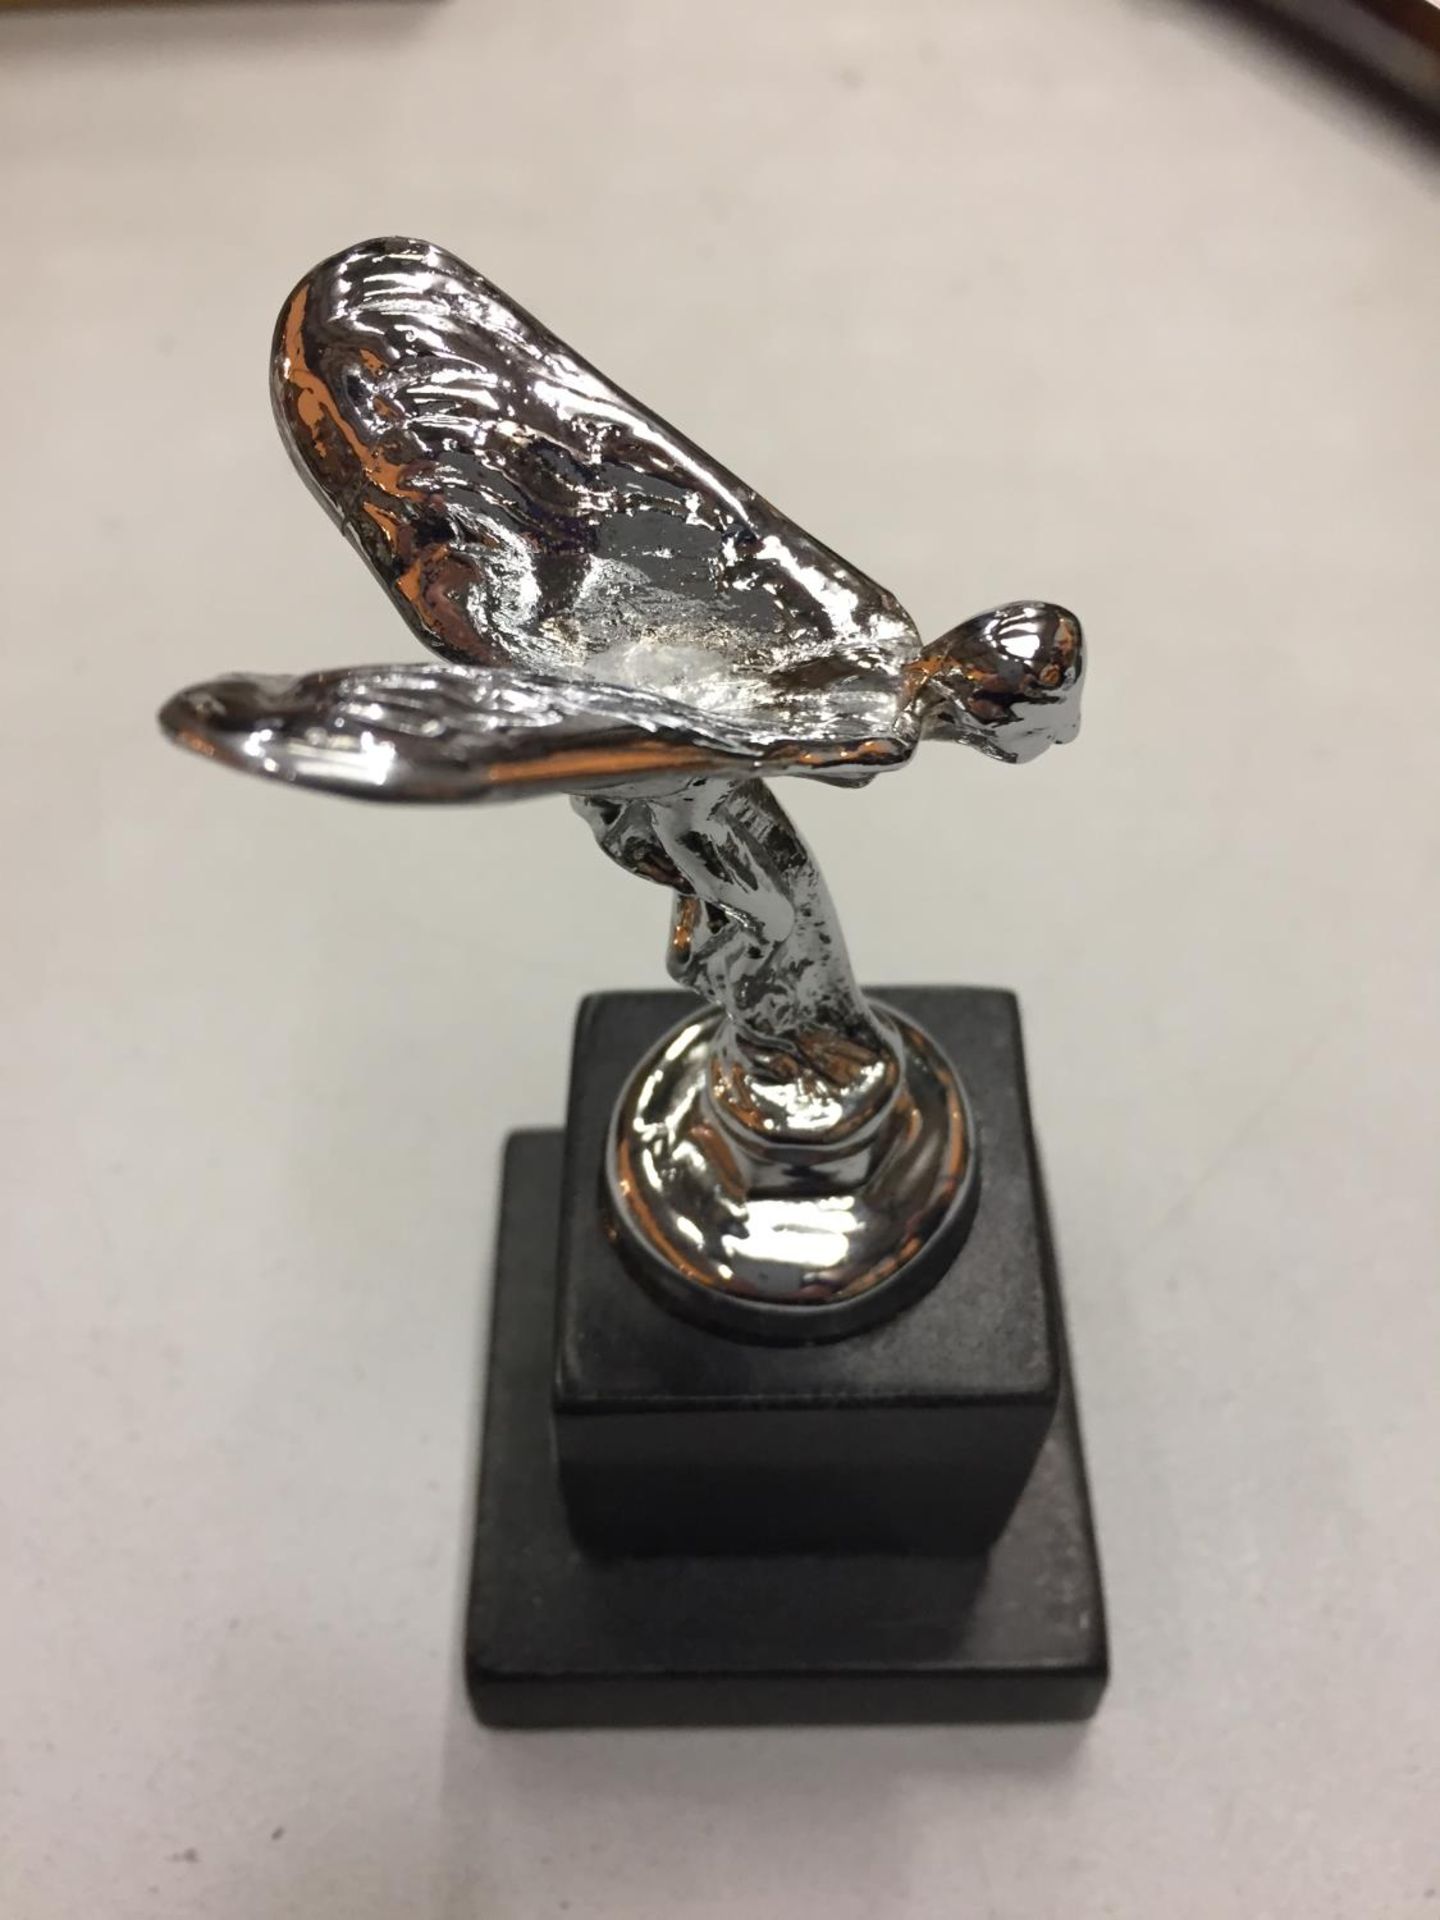 A ROLLS ROYCE SPIRIT OF ECSTASY FLYING LADY MOUNTED ON A BLACK BASE H:12.5CM - Image 3 of 3